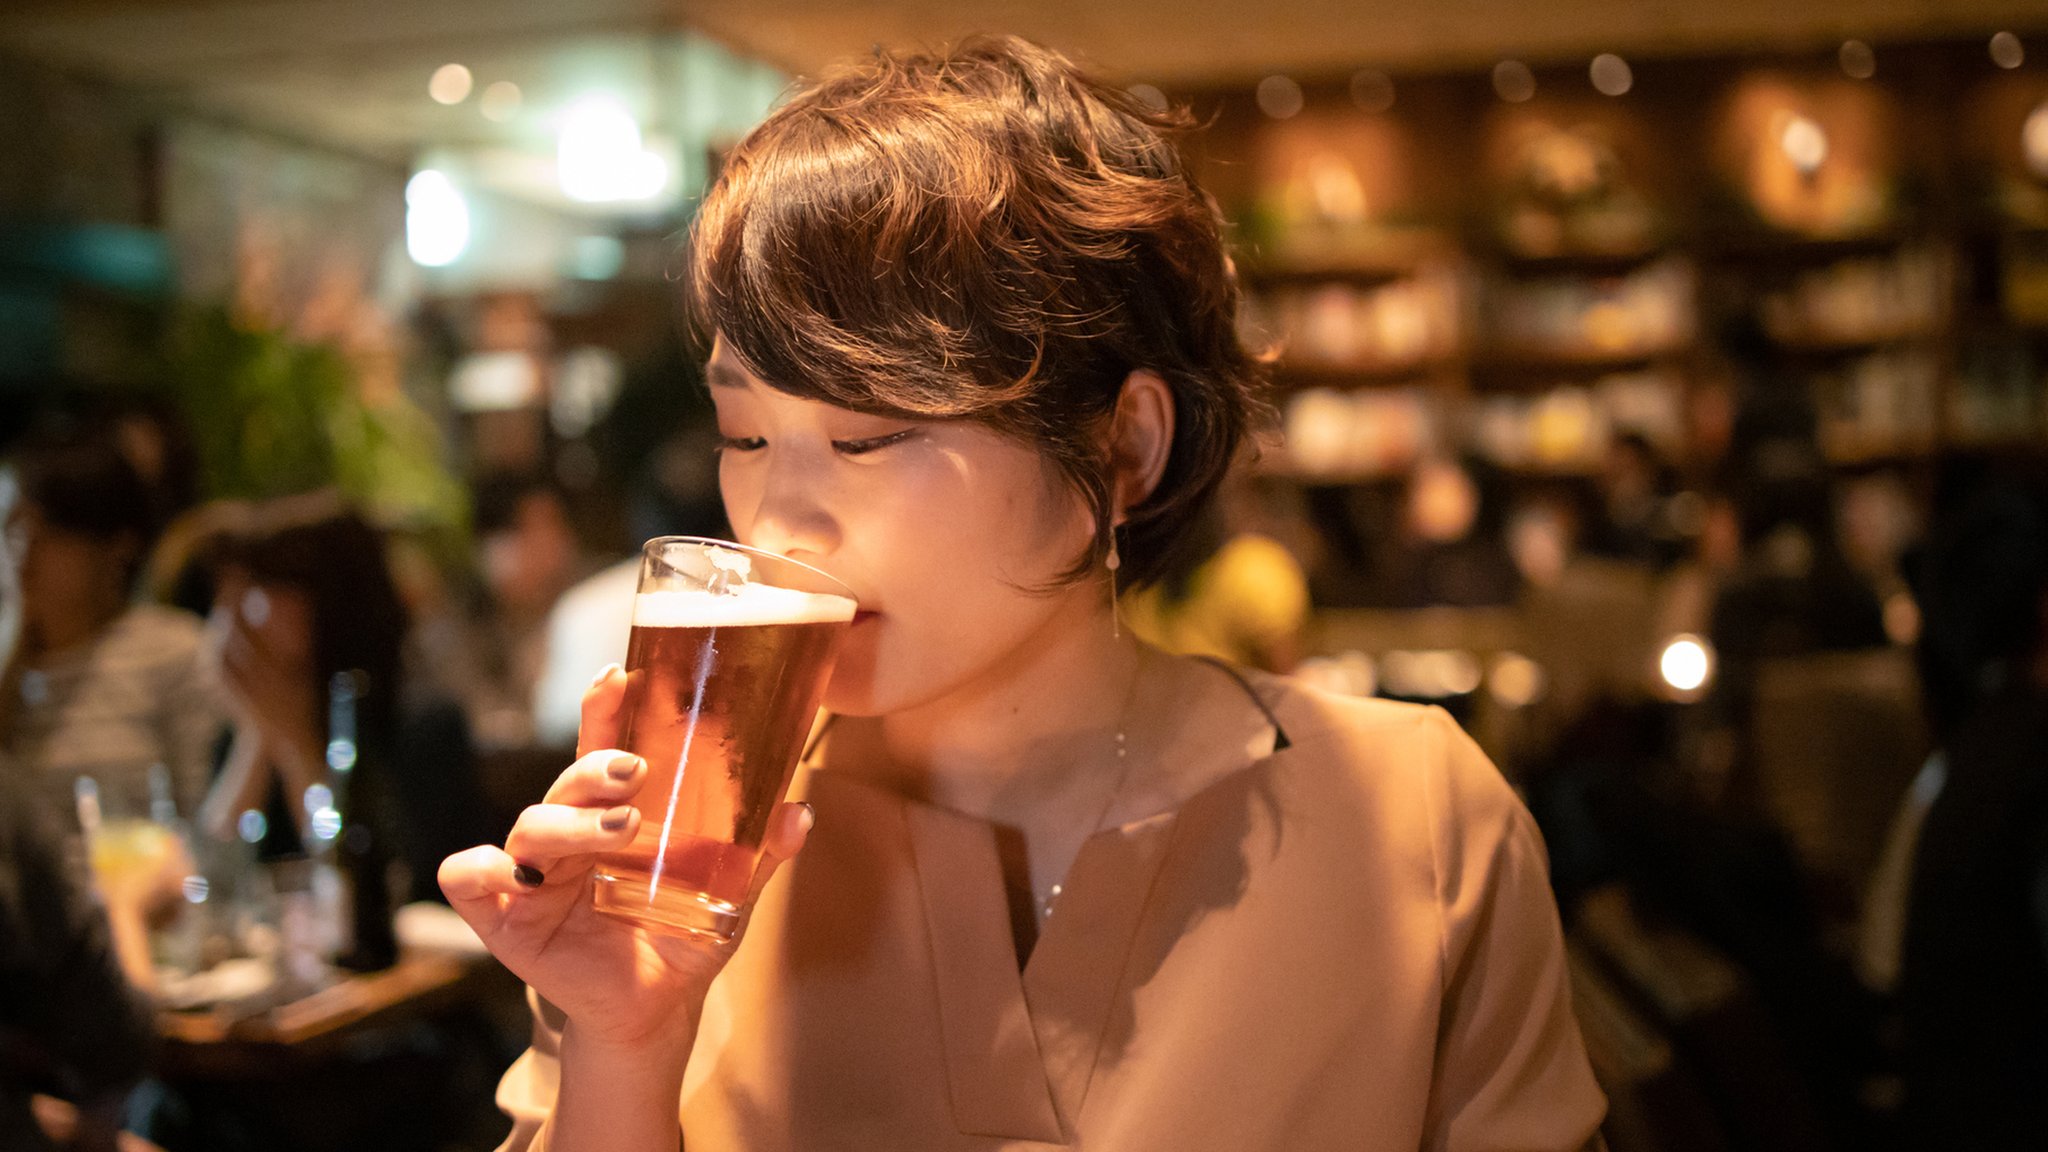 Japan urges its young people to drink more to boost economy pic